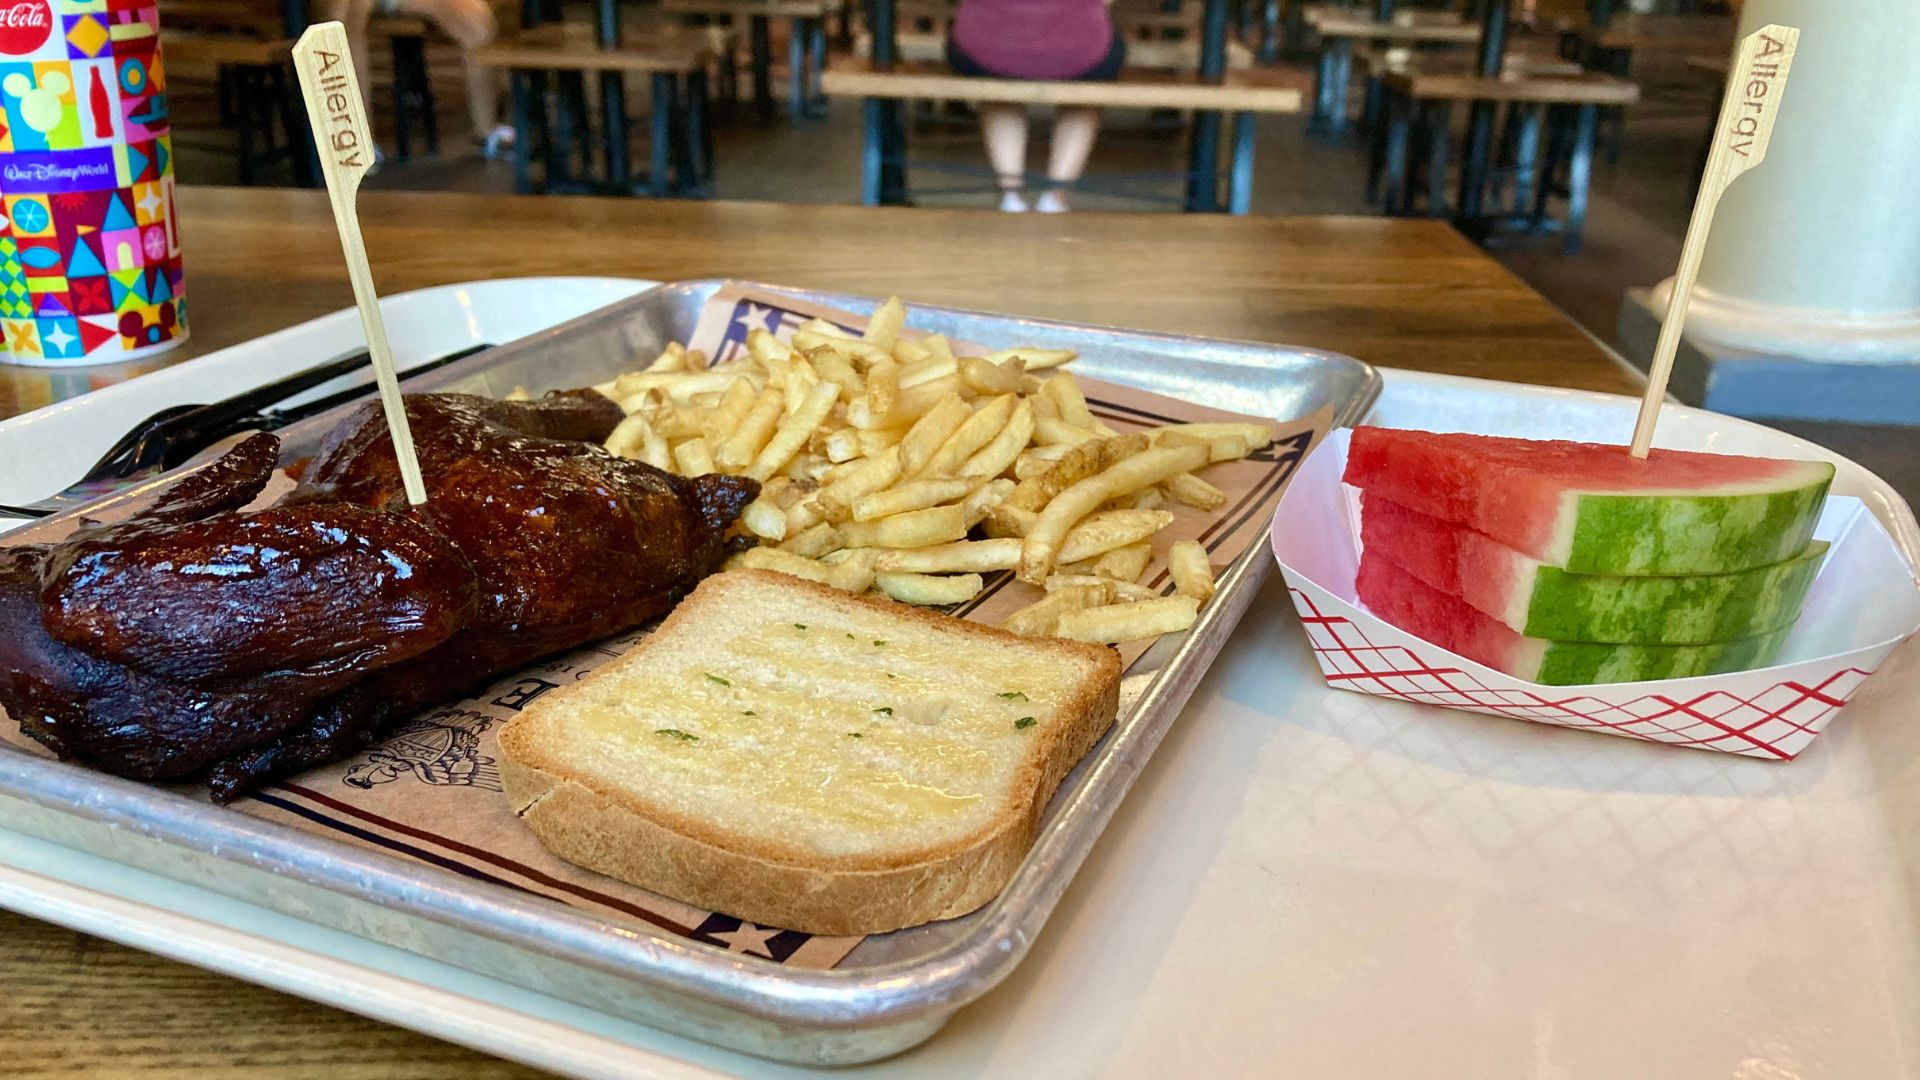 A gluten-free and dairy-free meal from Regal Eagle Smokehouse at Epcot